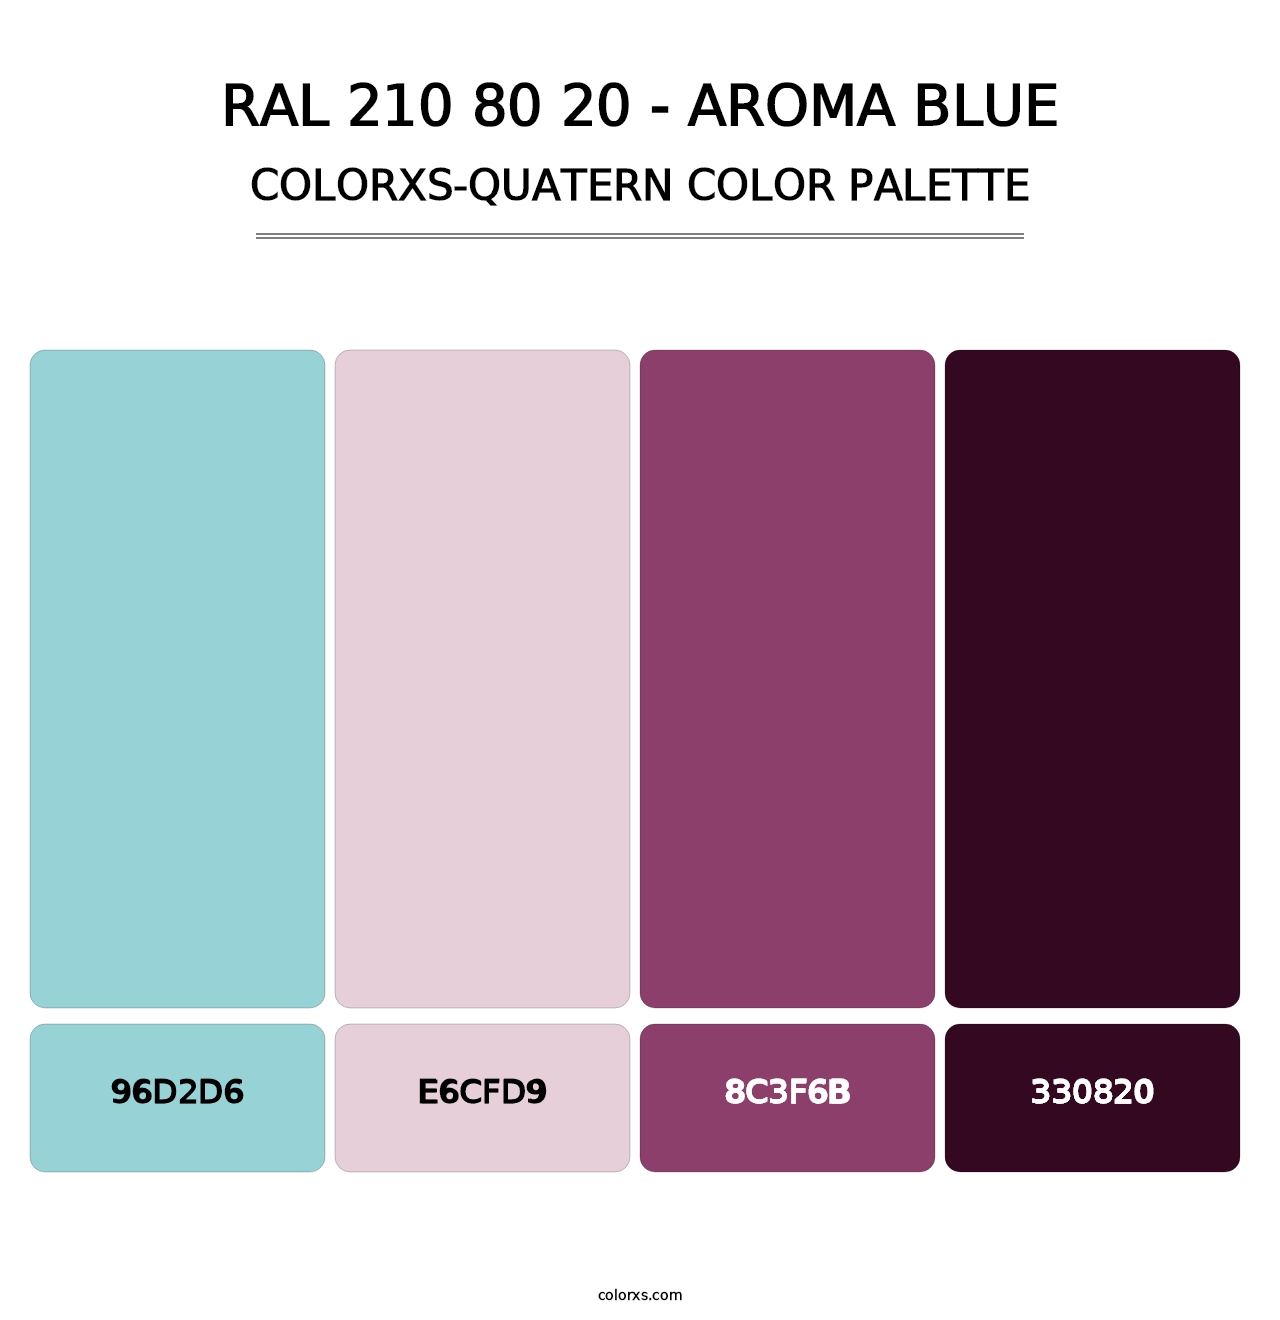 RAL 210 80 20 - Aroma Blue - Colorxs Quatern Palette